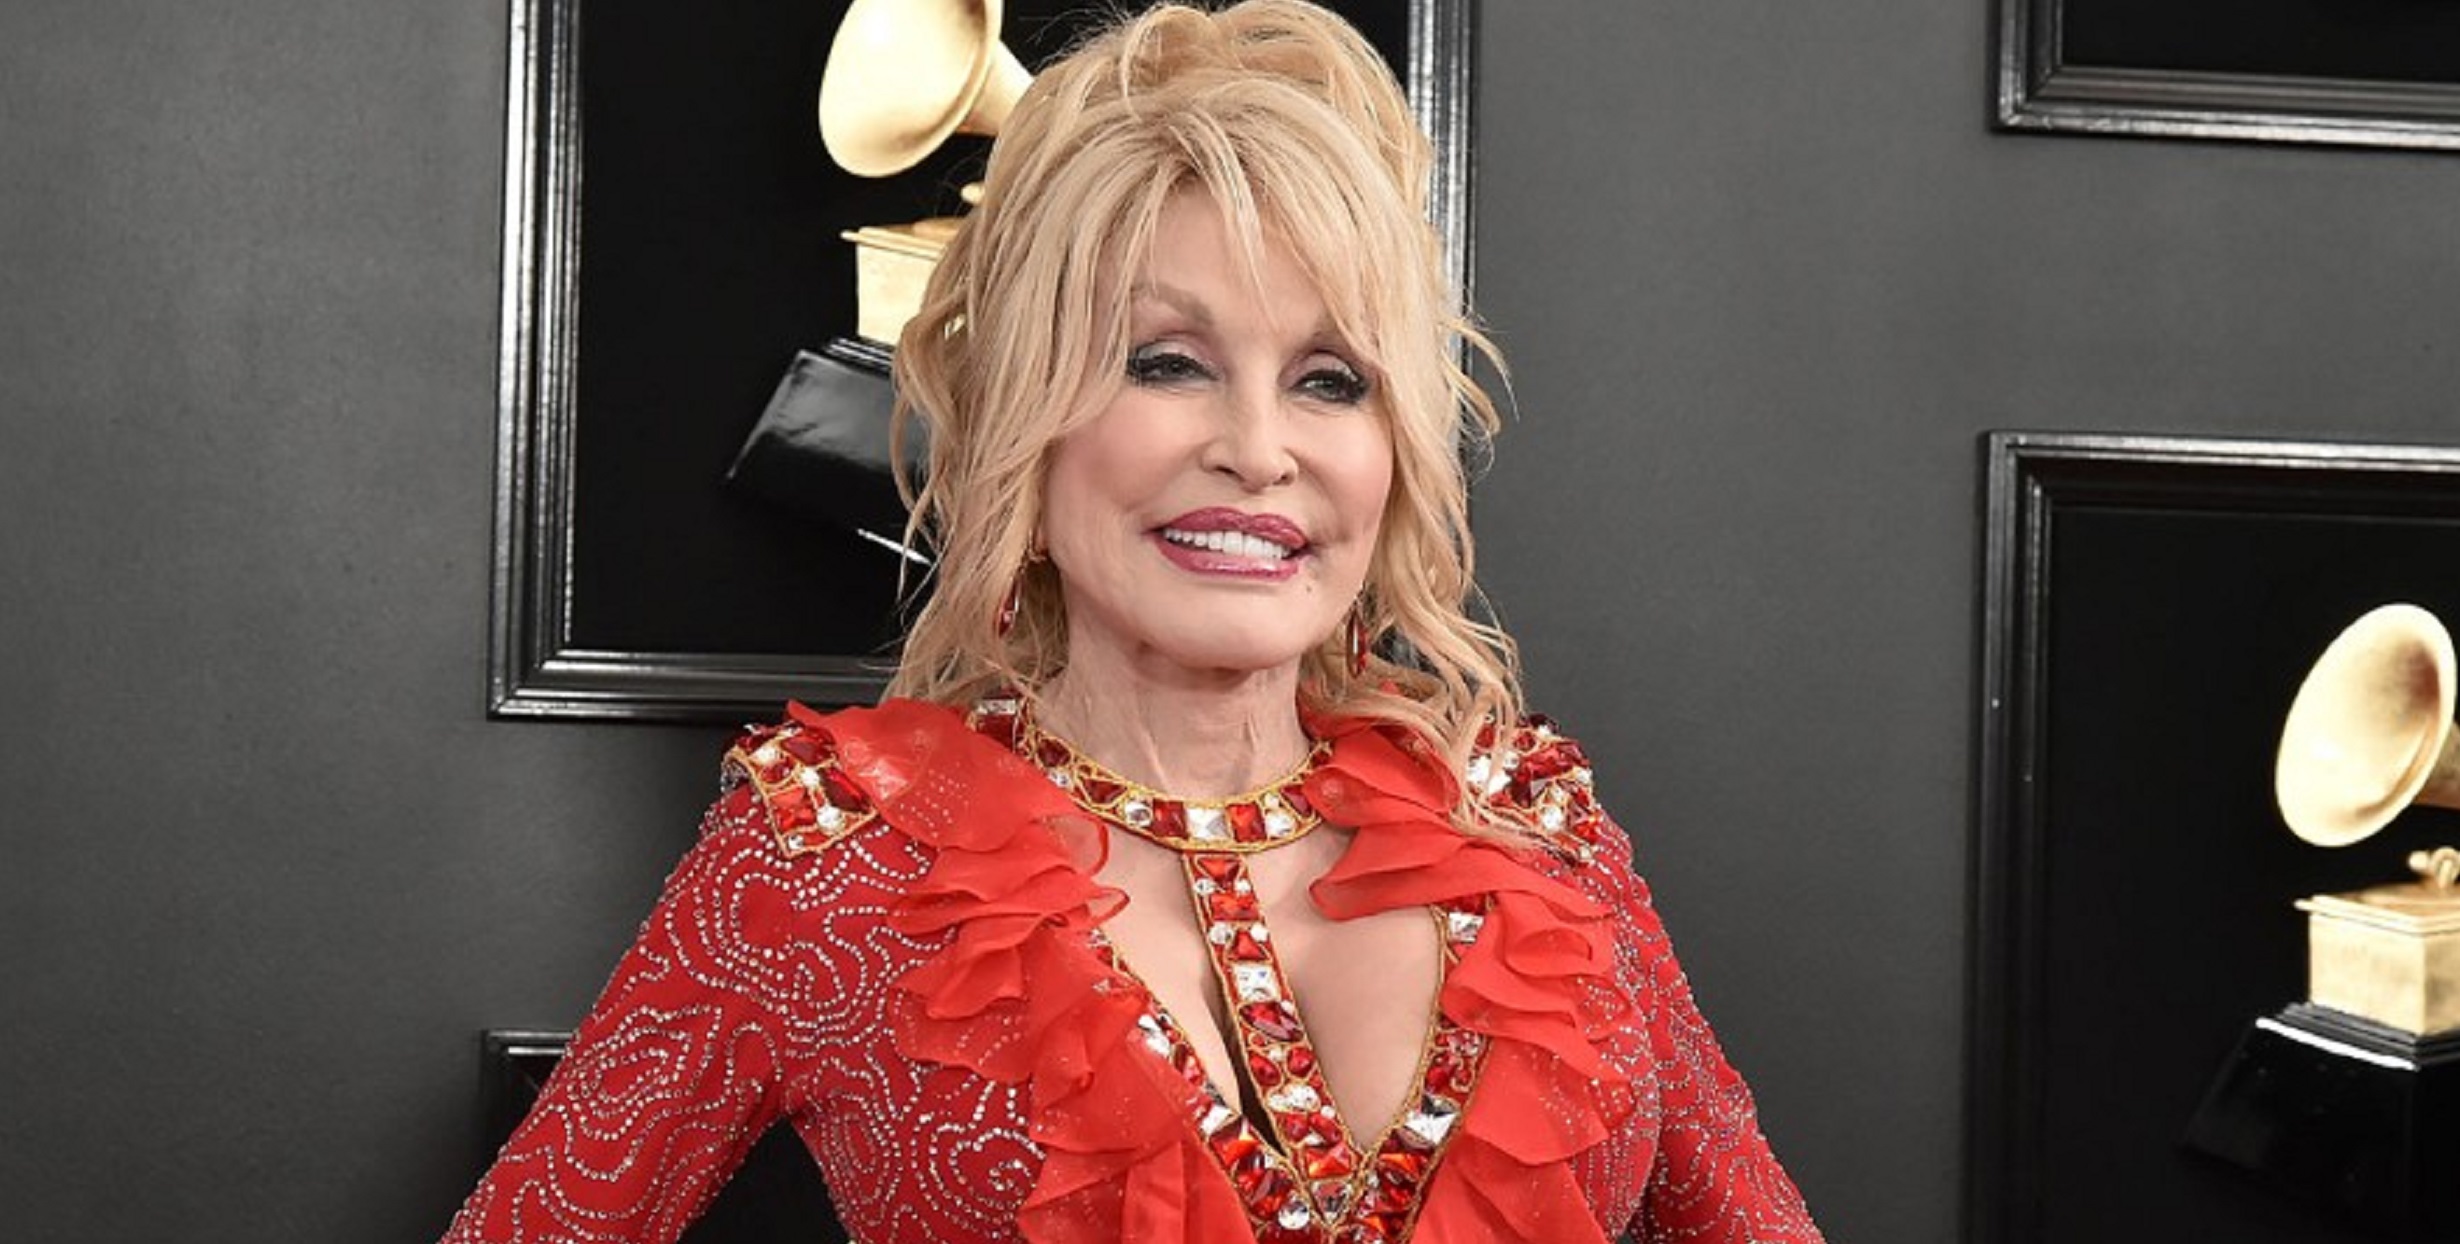 “Our Little White Asses Aren’t The Only Ones That Matter” – Dolly Parton Supports Black Lives Matter